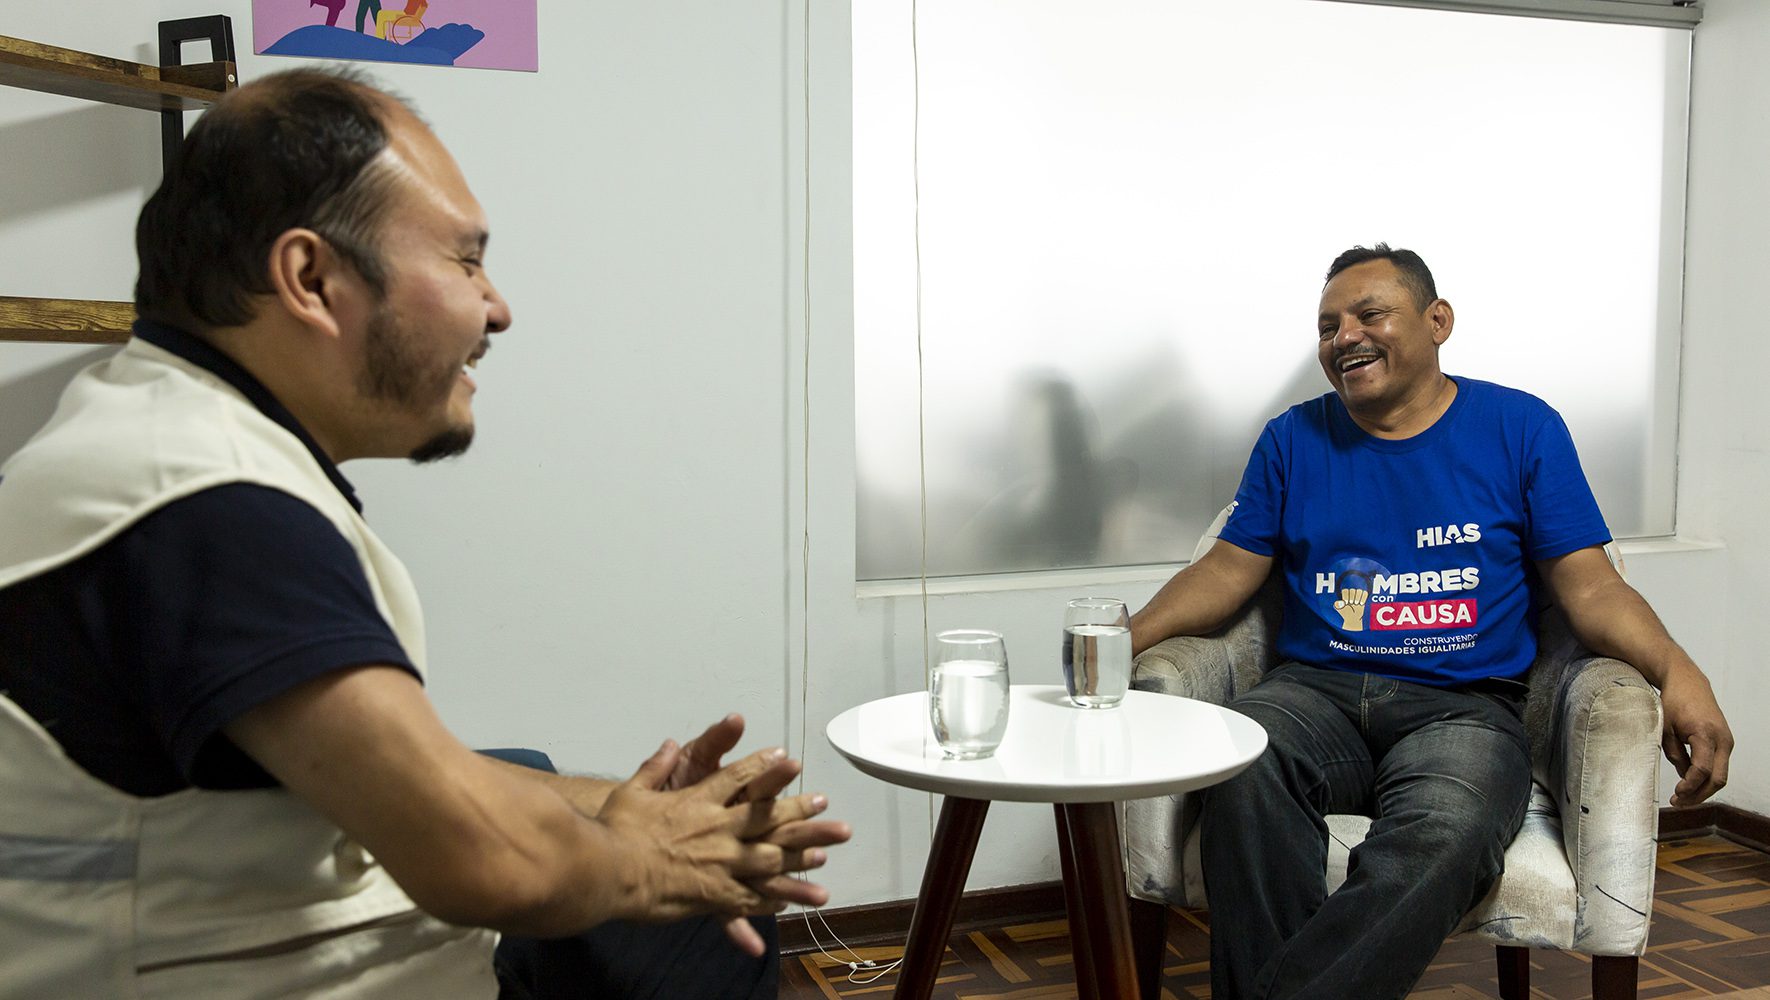 HIAS Peru staff member José Mireles Espinoza exchanging ideas with Jesús Fuenmayor (53) about the progress made in his home as a result of the recent course he received on gender and positive masculinities. 
Mireles is a gender and GBV officer of the HIAS Peru staff.